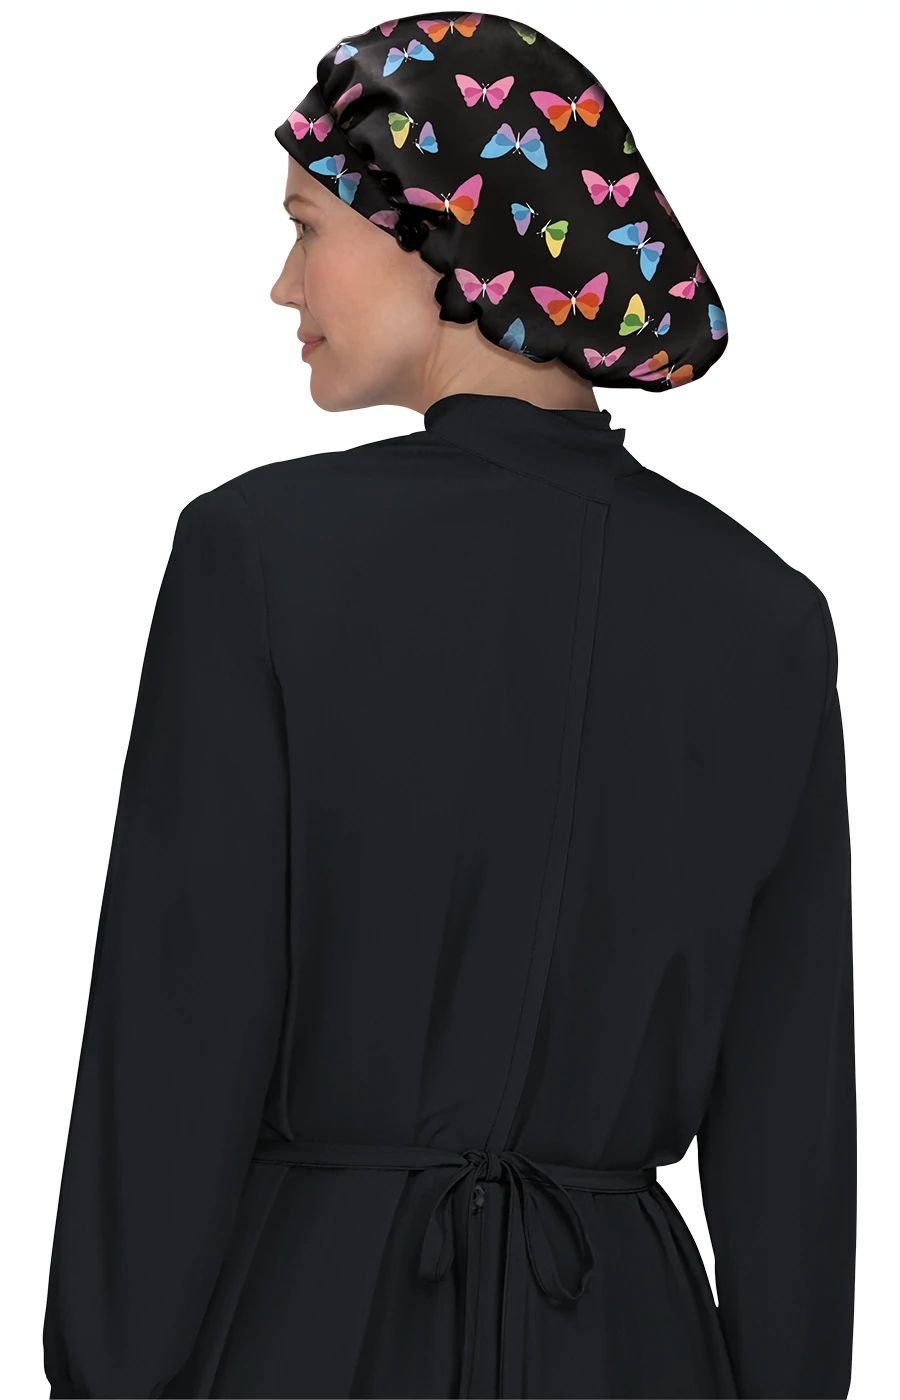 printed-bouffant-caps-butterfly-sheer